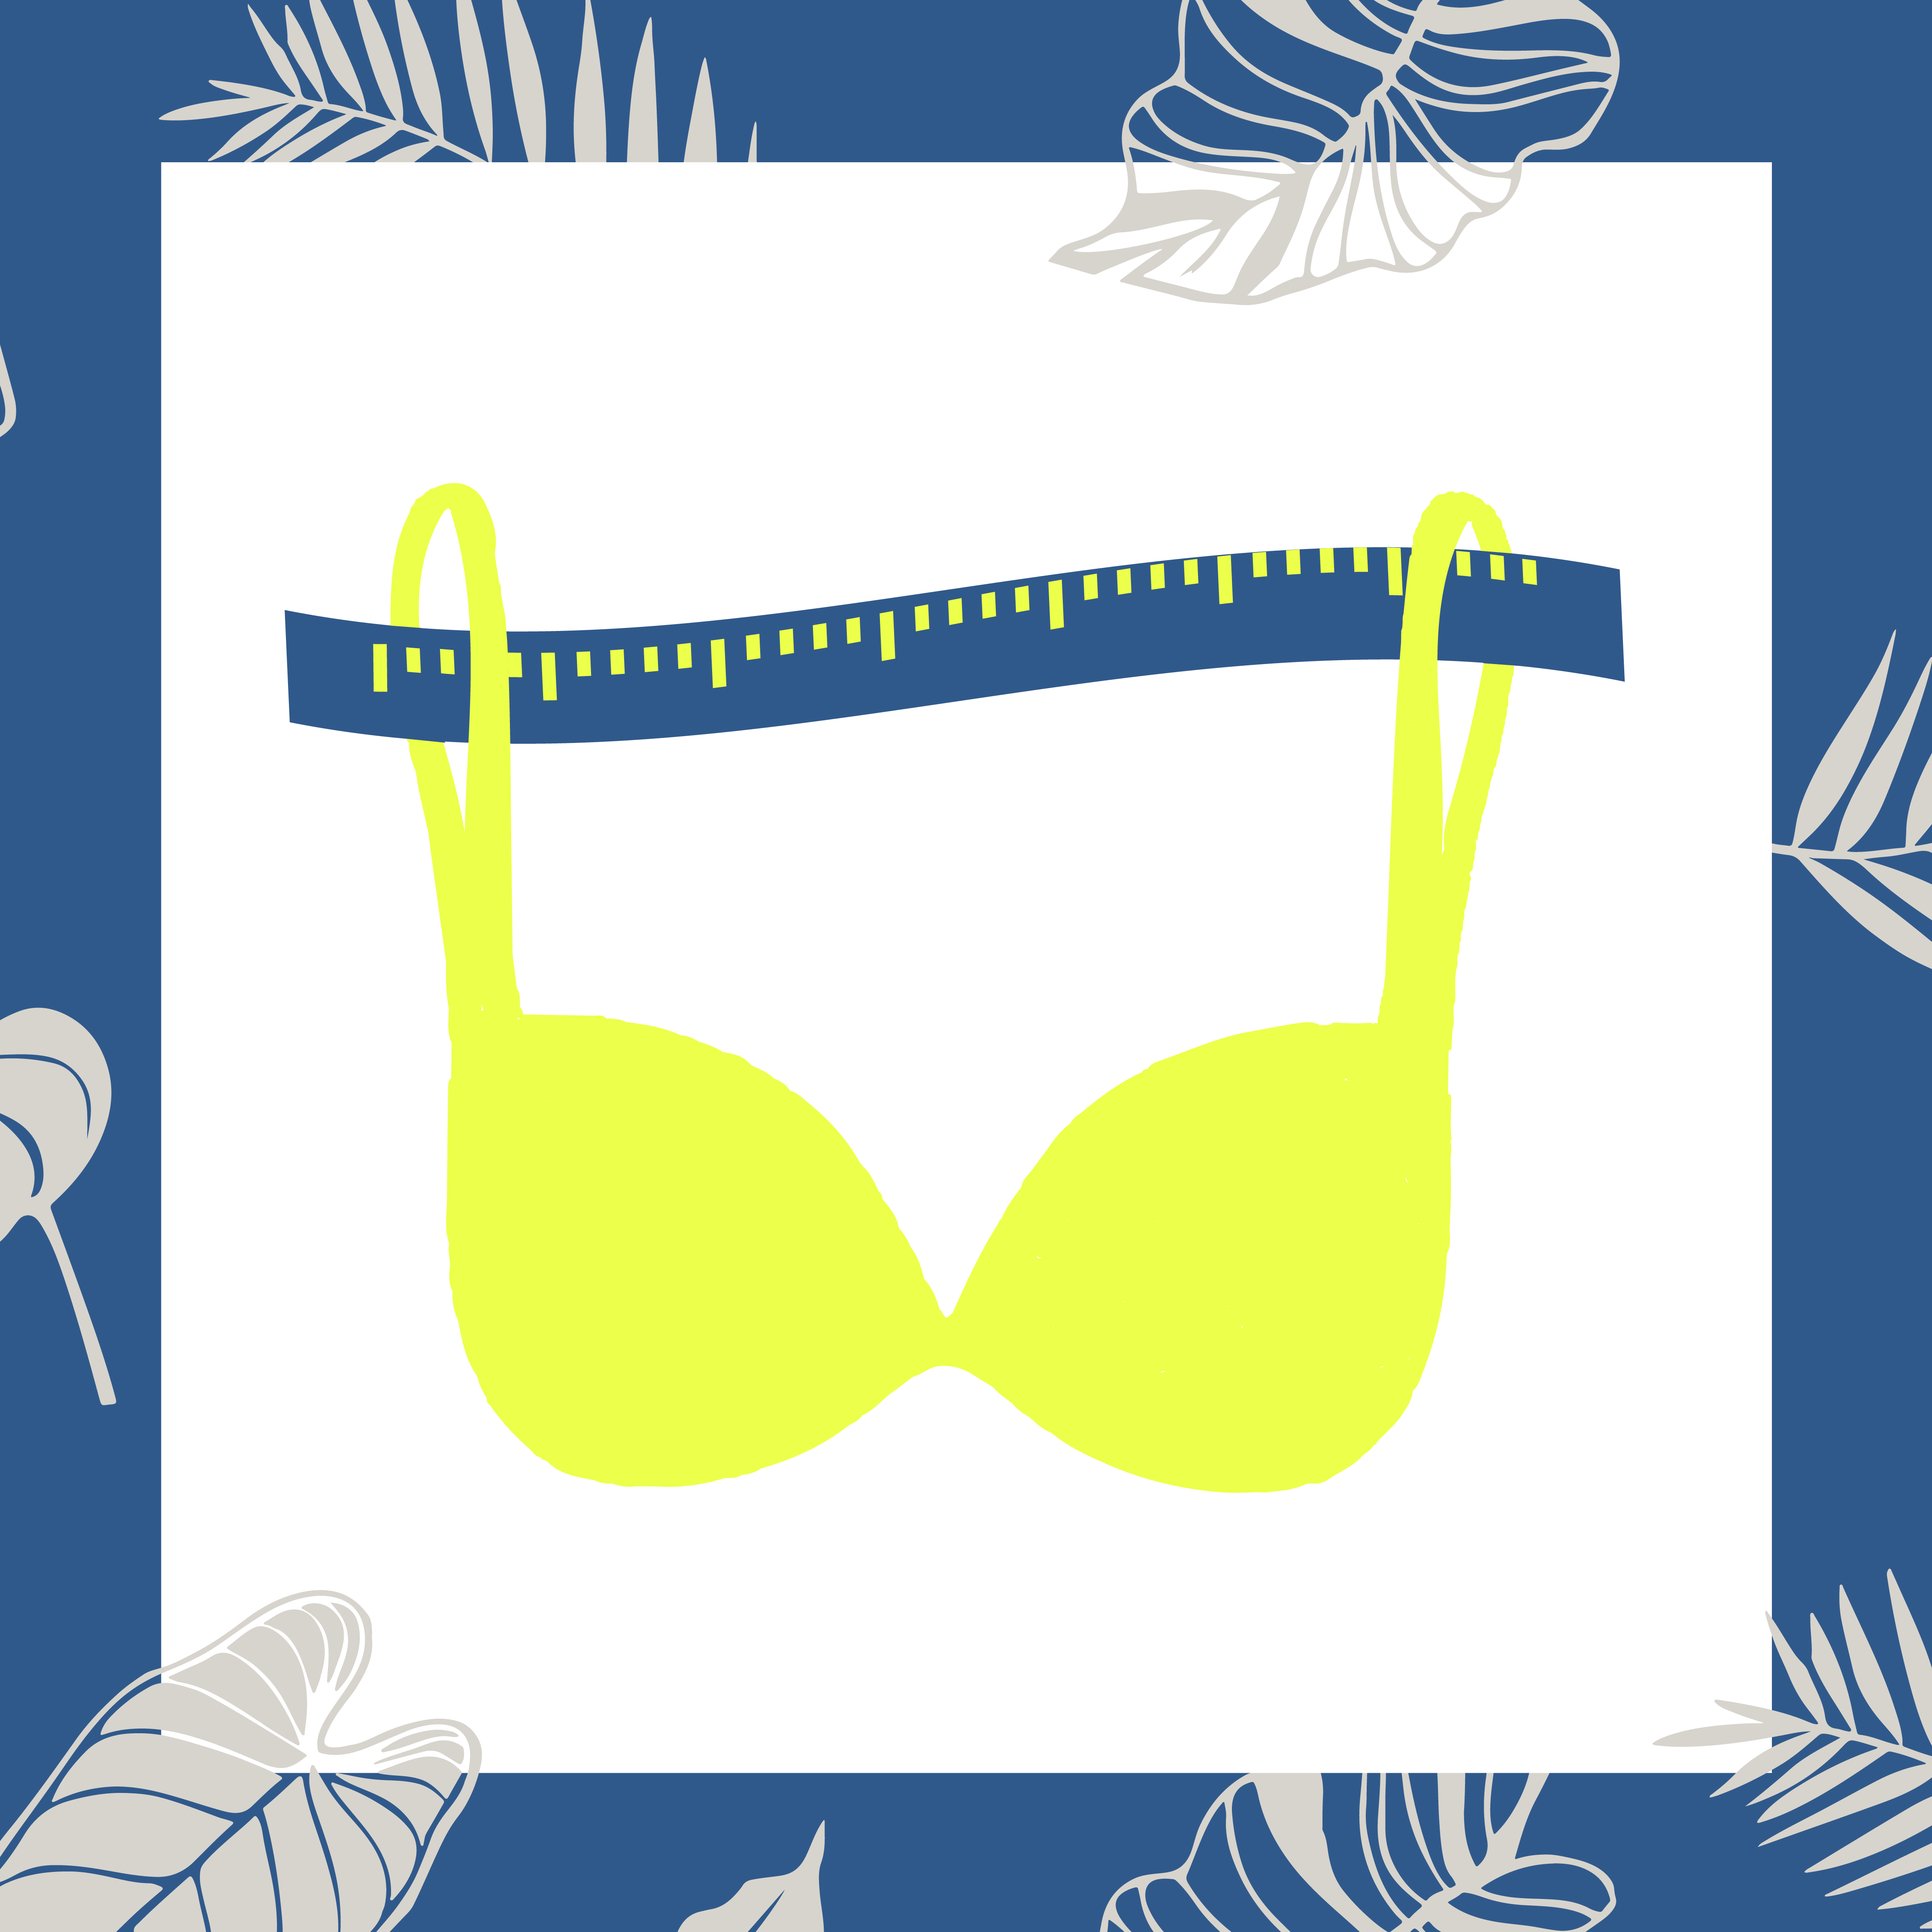 Are You Wearing The Right Bra Size? Here's 5 Ways To Tell At Home -  Honey + Lime